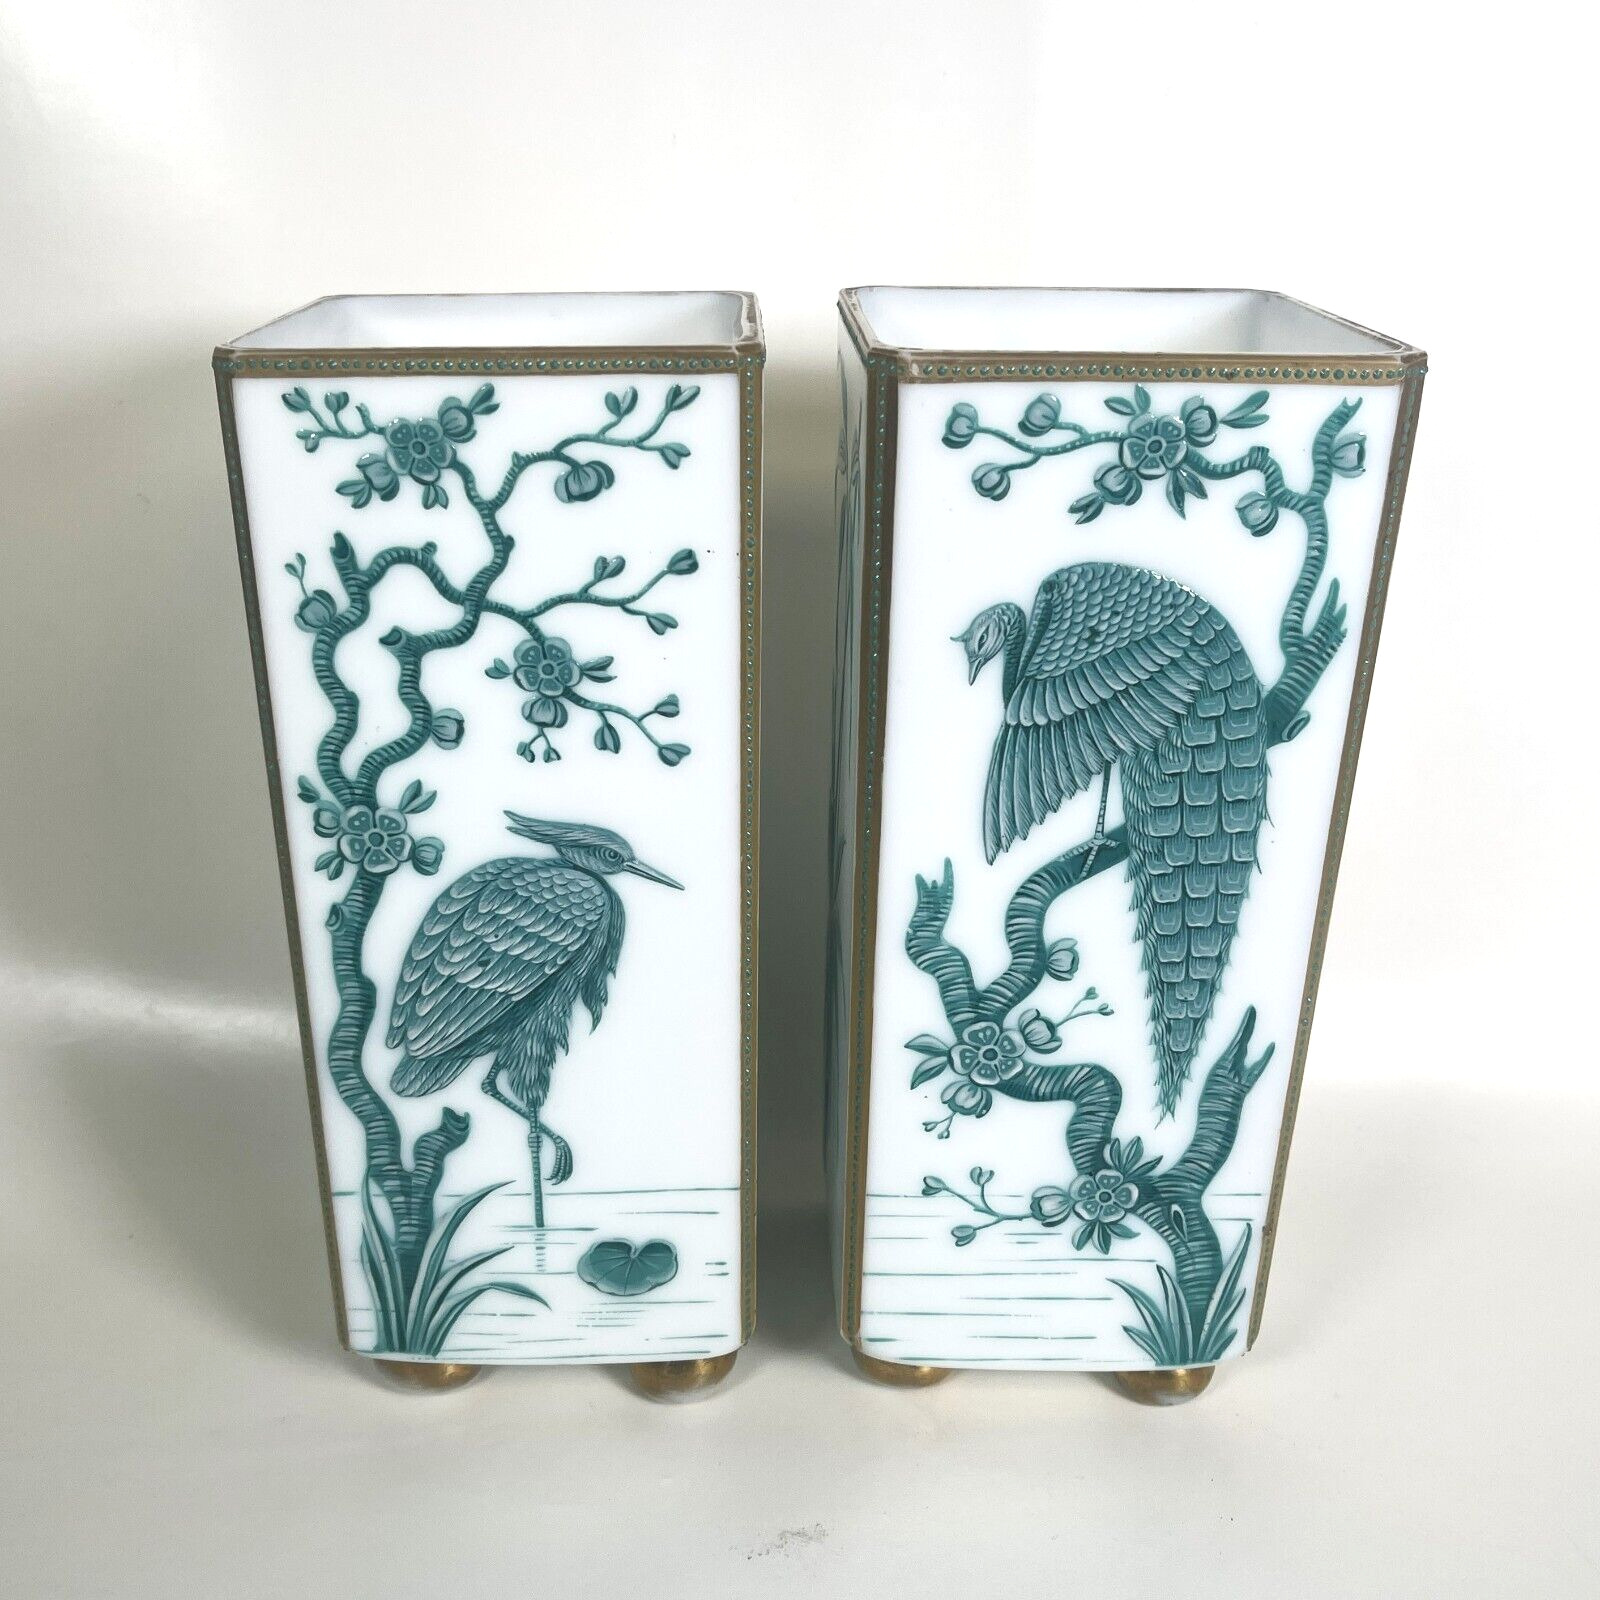 Exceptional pair of Late 19th C. Japanized Enamel Decorated Footed Square Glass